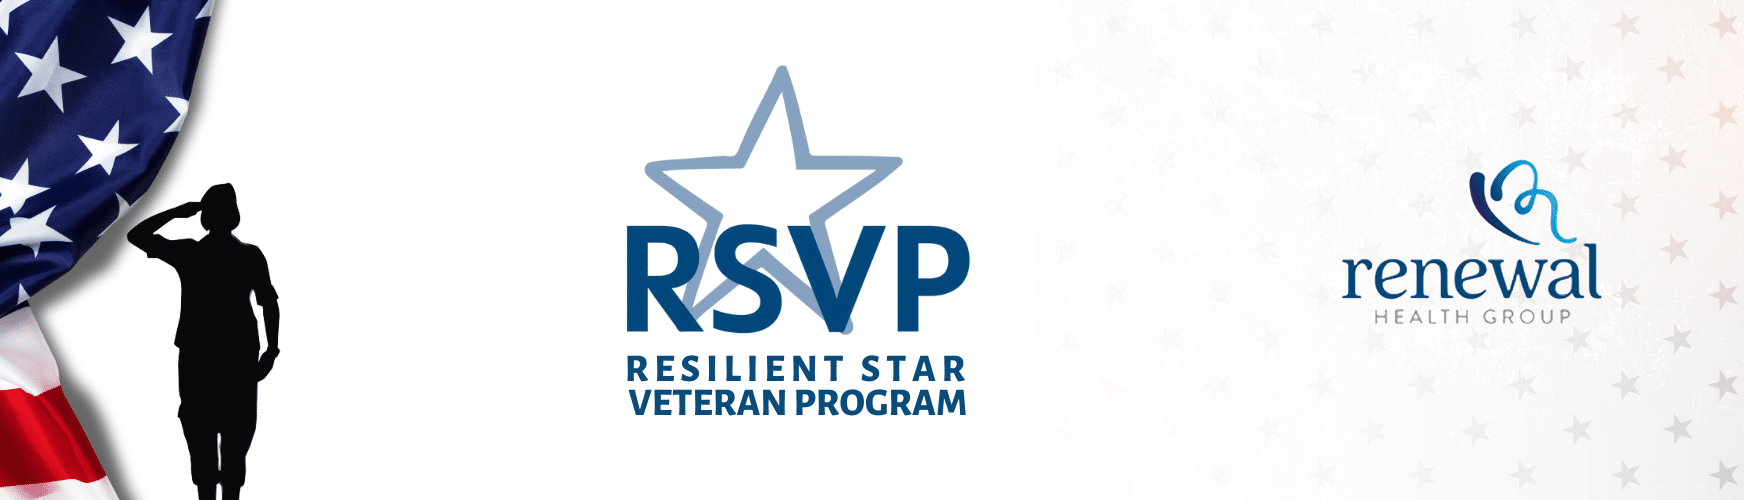 Resilient Star Veteran Program RSVP for Addiction Treatment in Southern California